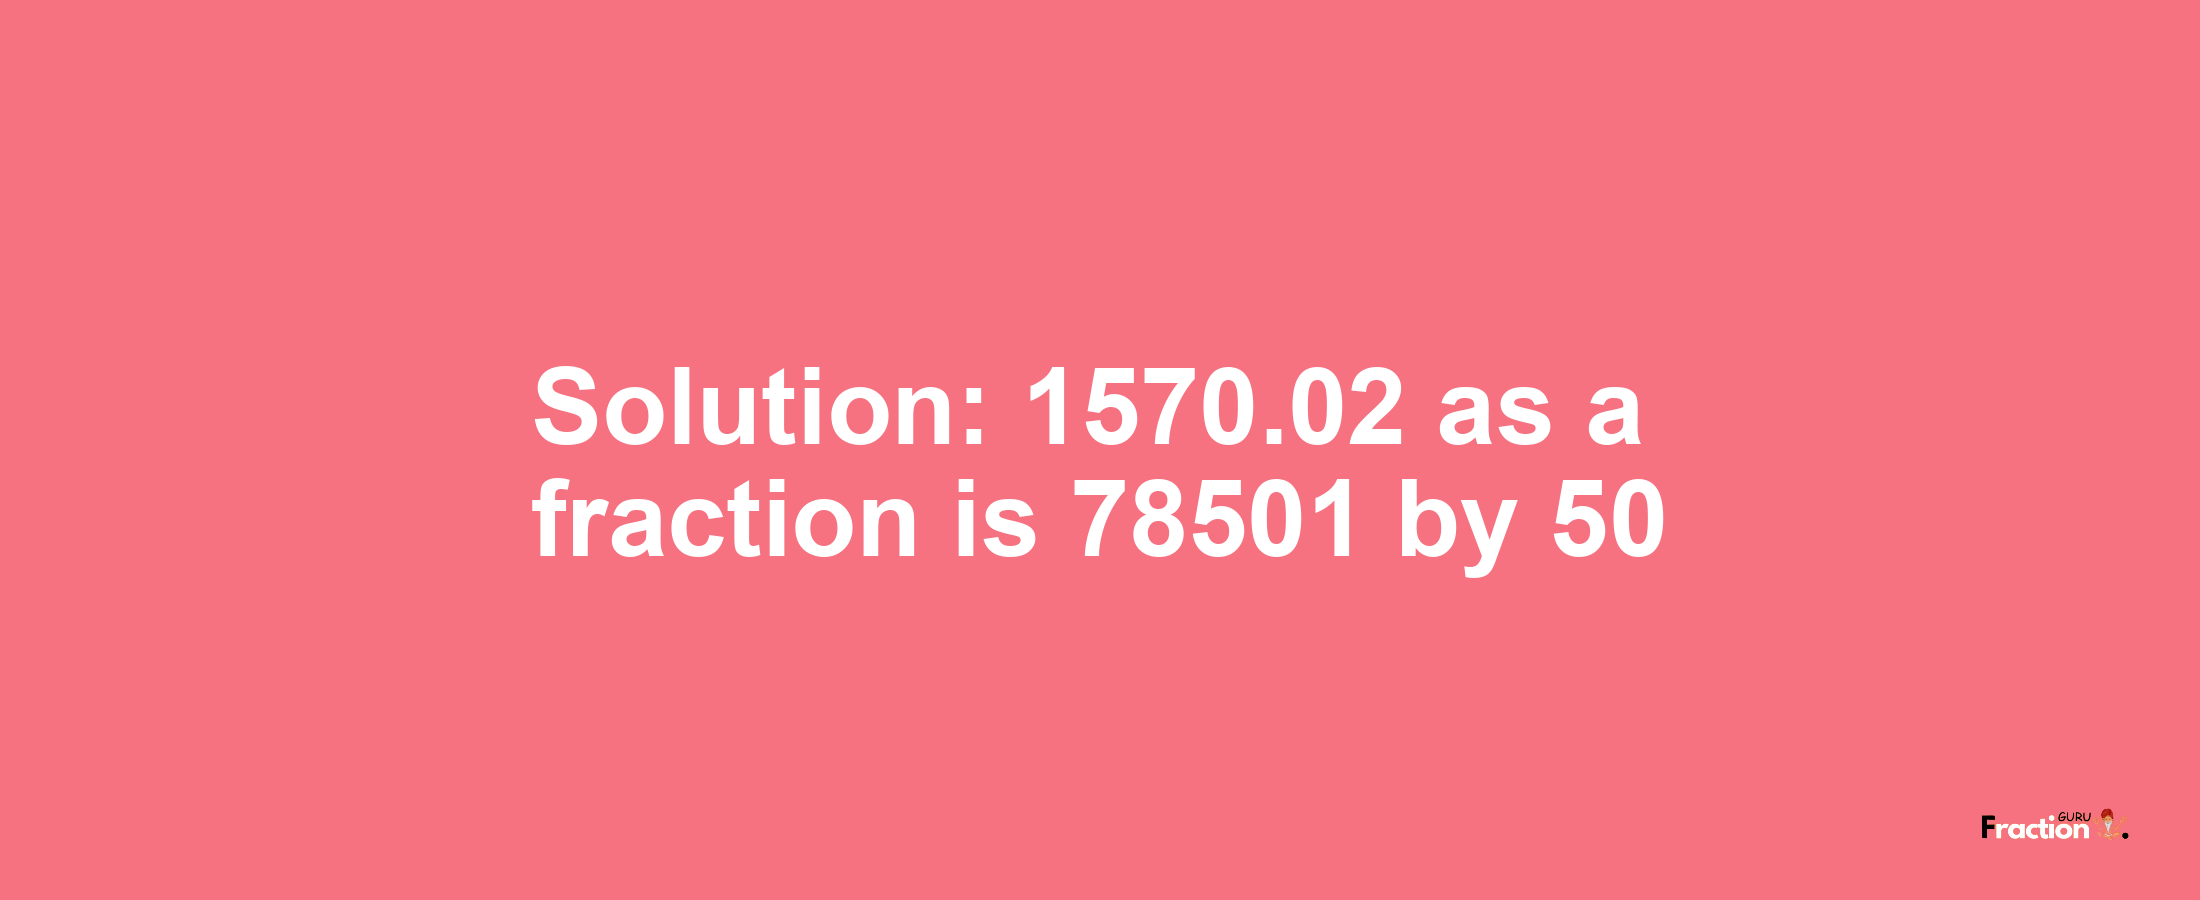 Solution:1570.02 as a fraction is 78501/50